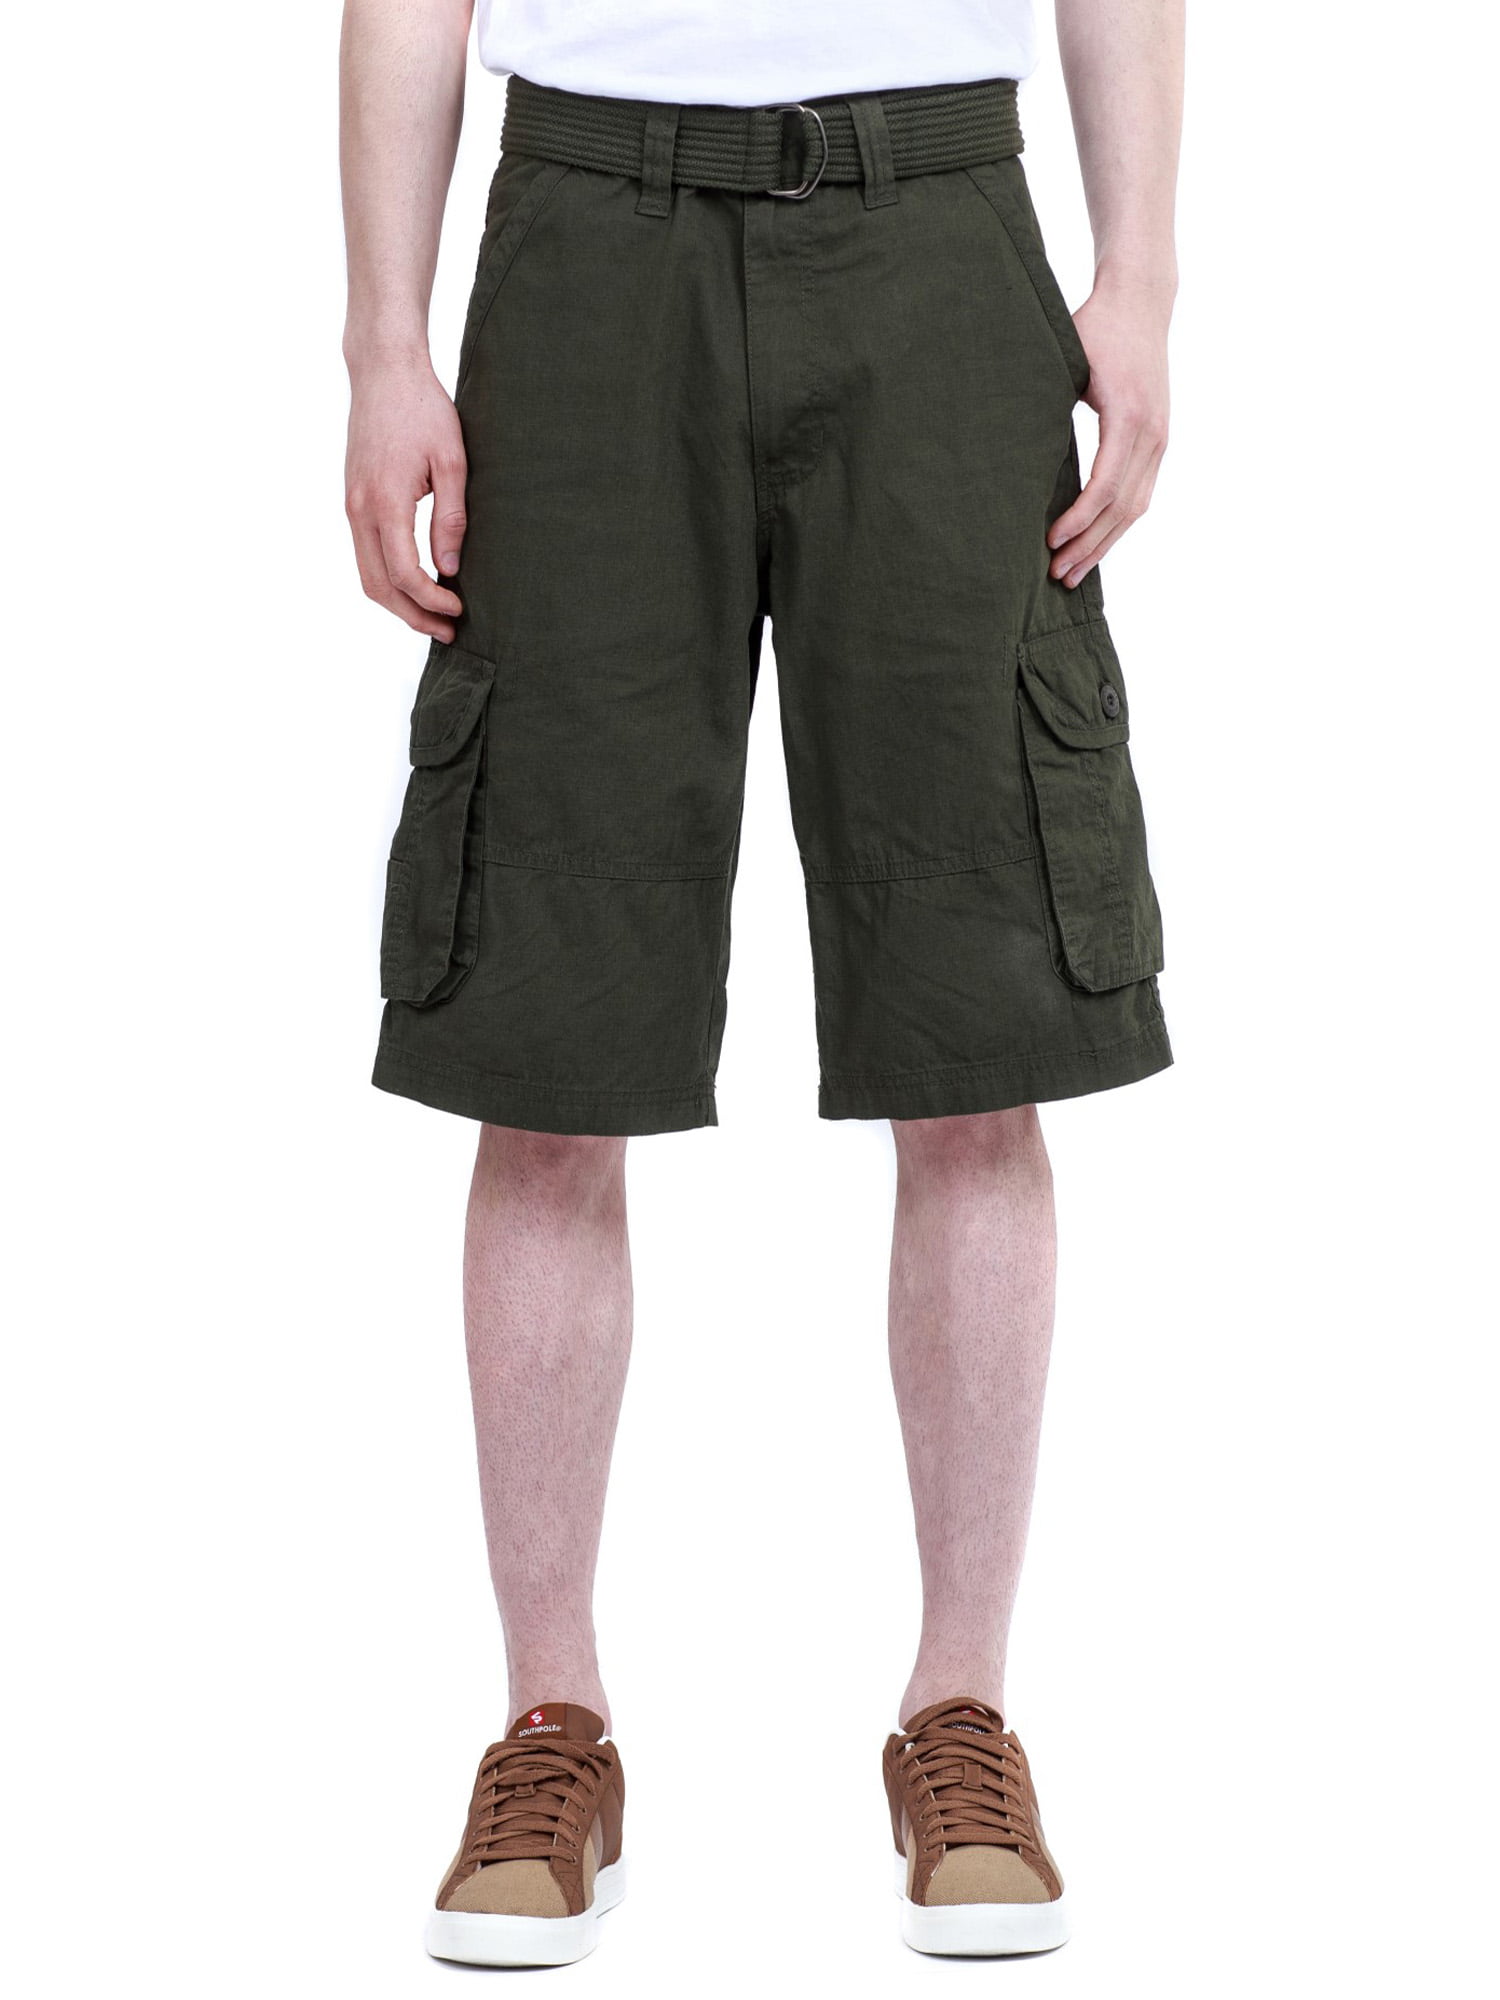 Southpole Mens Big and Tall Big & Tall Belted Cargo Shorts with Cell Phone Pocket 